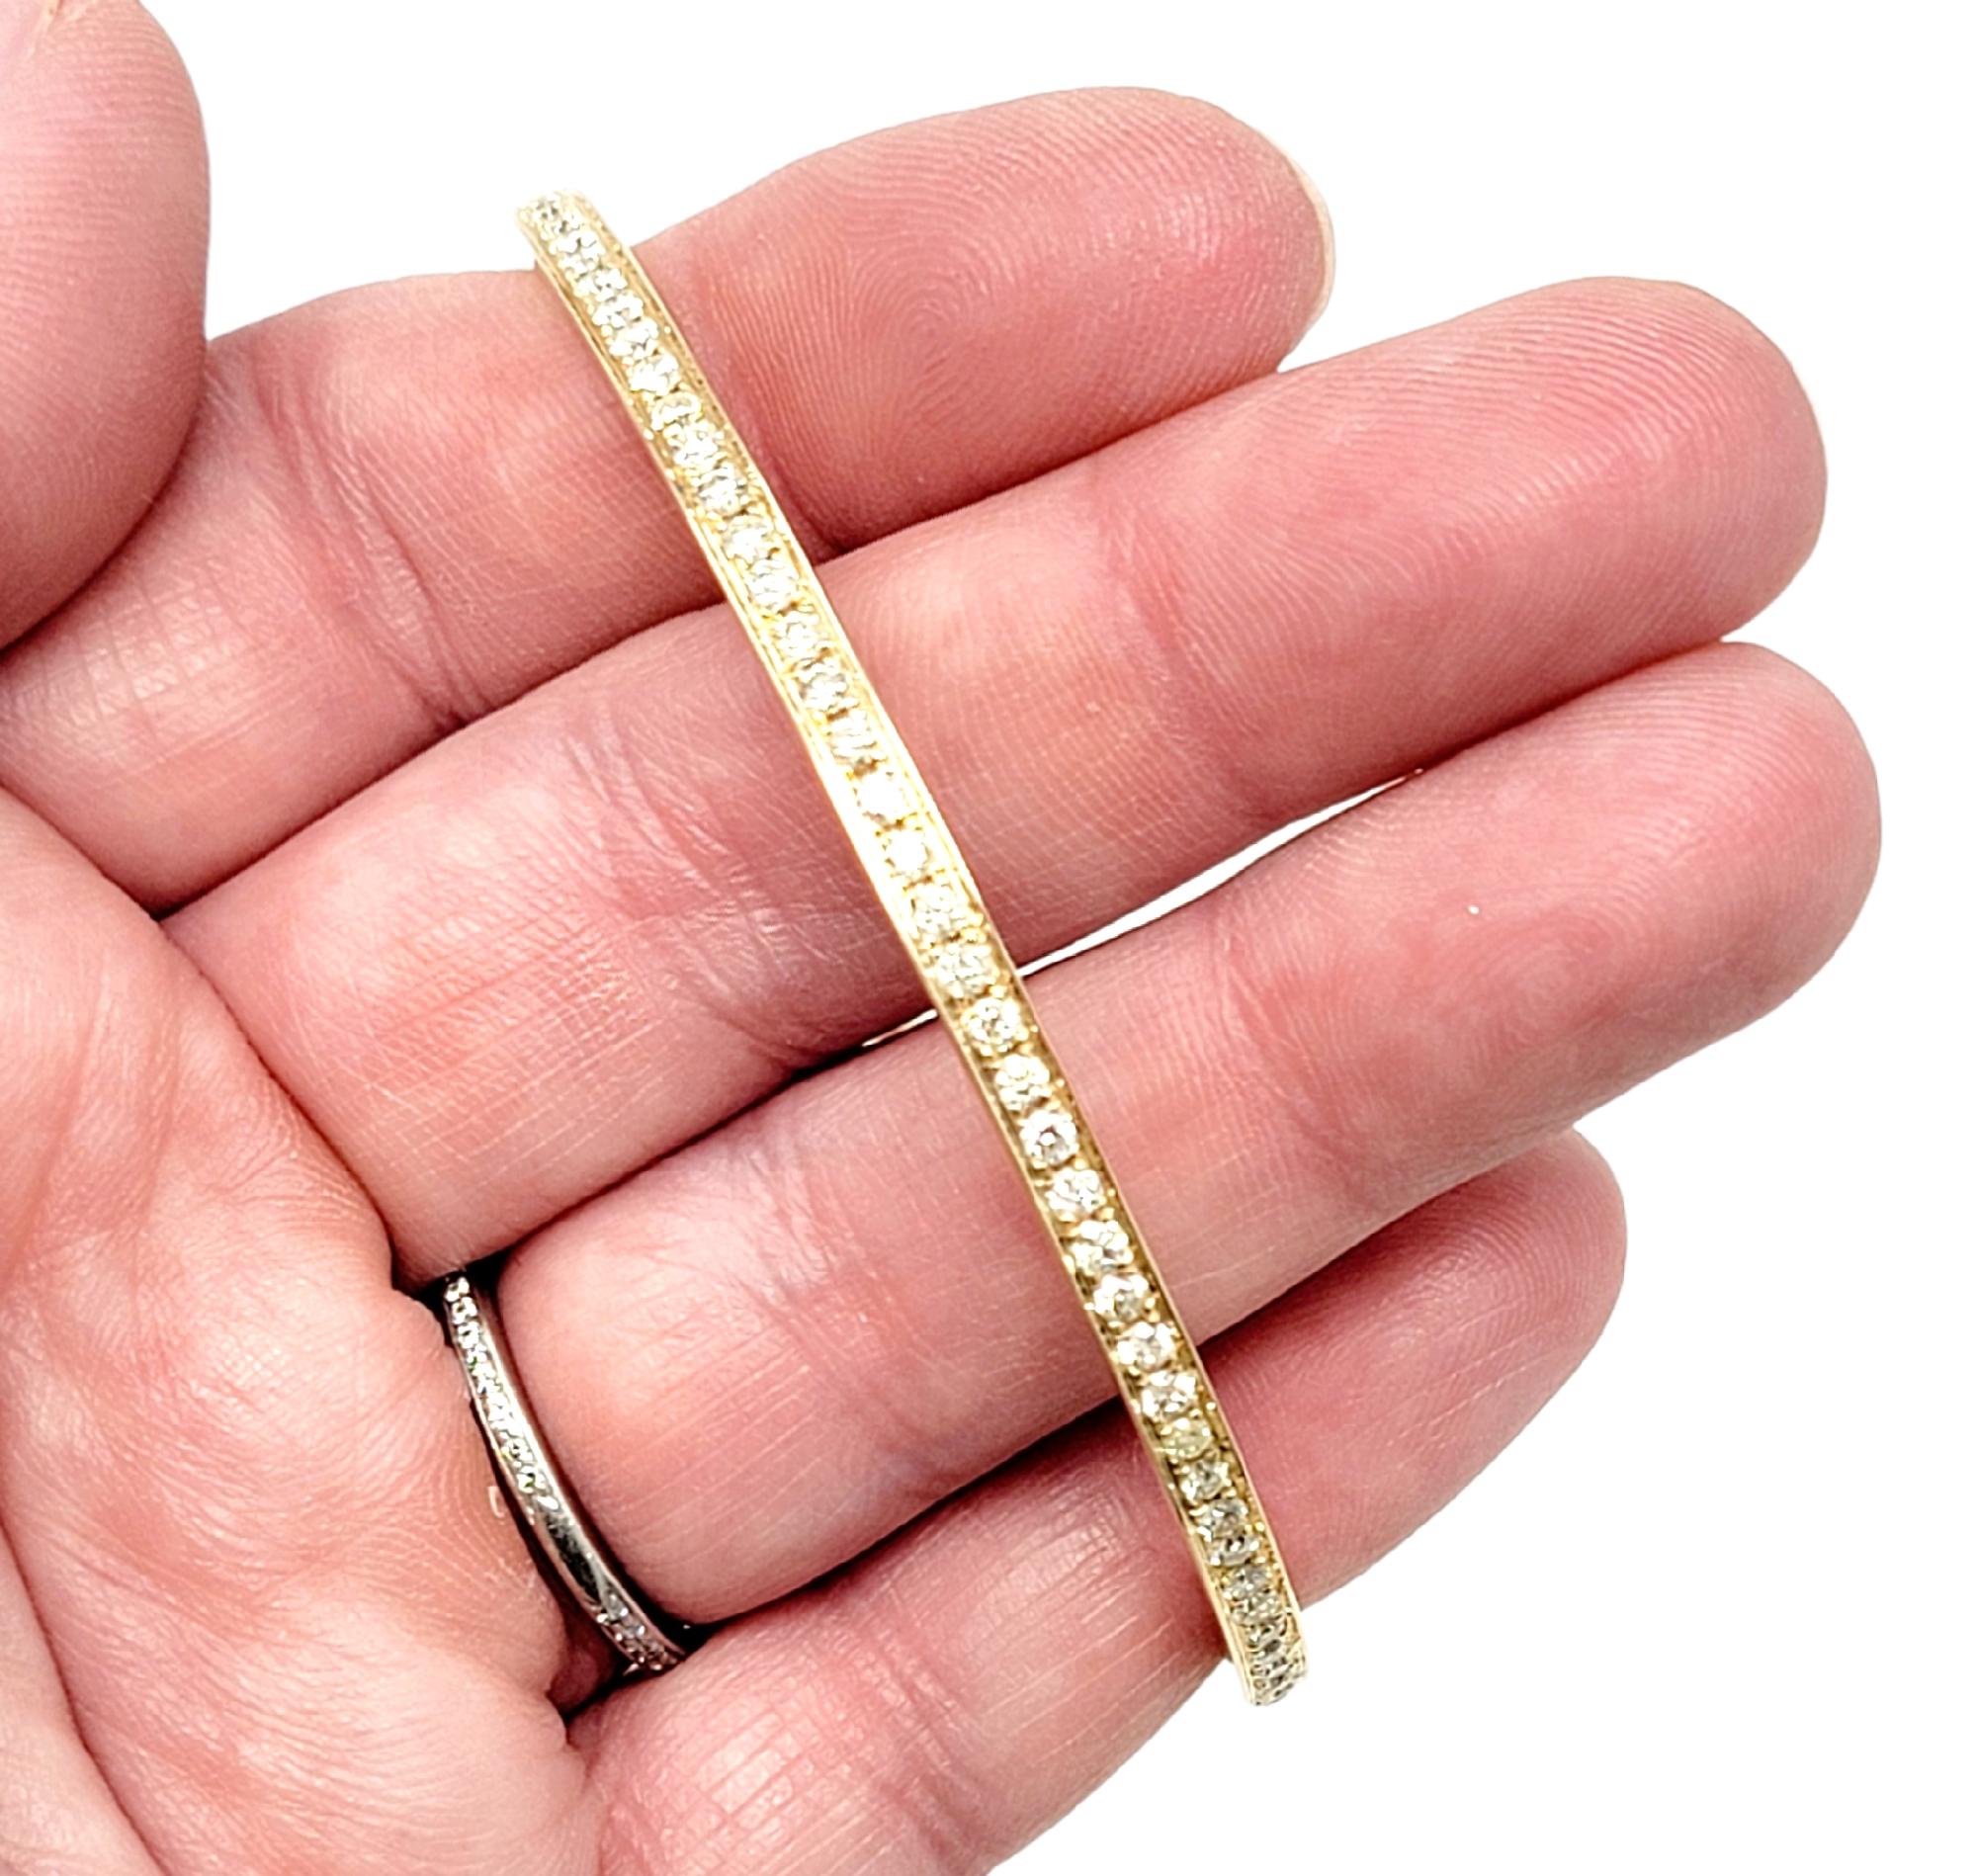 Simple yet stunning diamond eternity bracelet. This delicate paved bangle bracelet boasts an ultra feminine feel, while the sleek simplicity gives it a modern elegance. It features 93 natural round brilliant diamonds, K-L-M in color and SI-I2 in